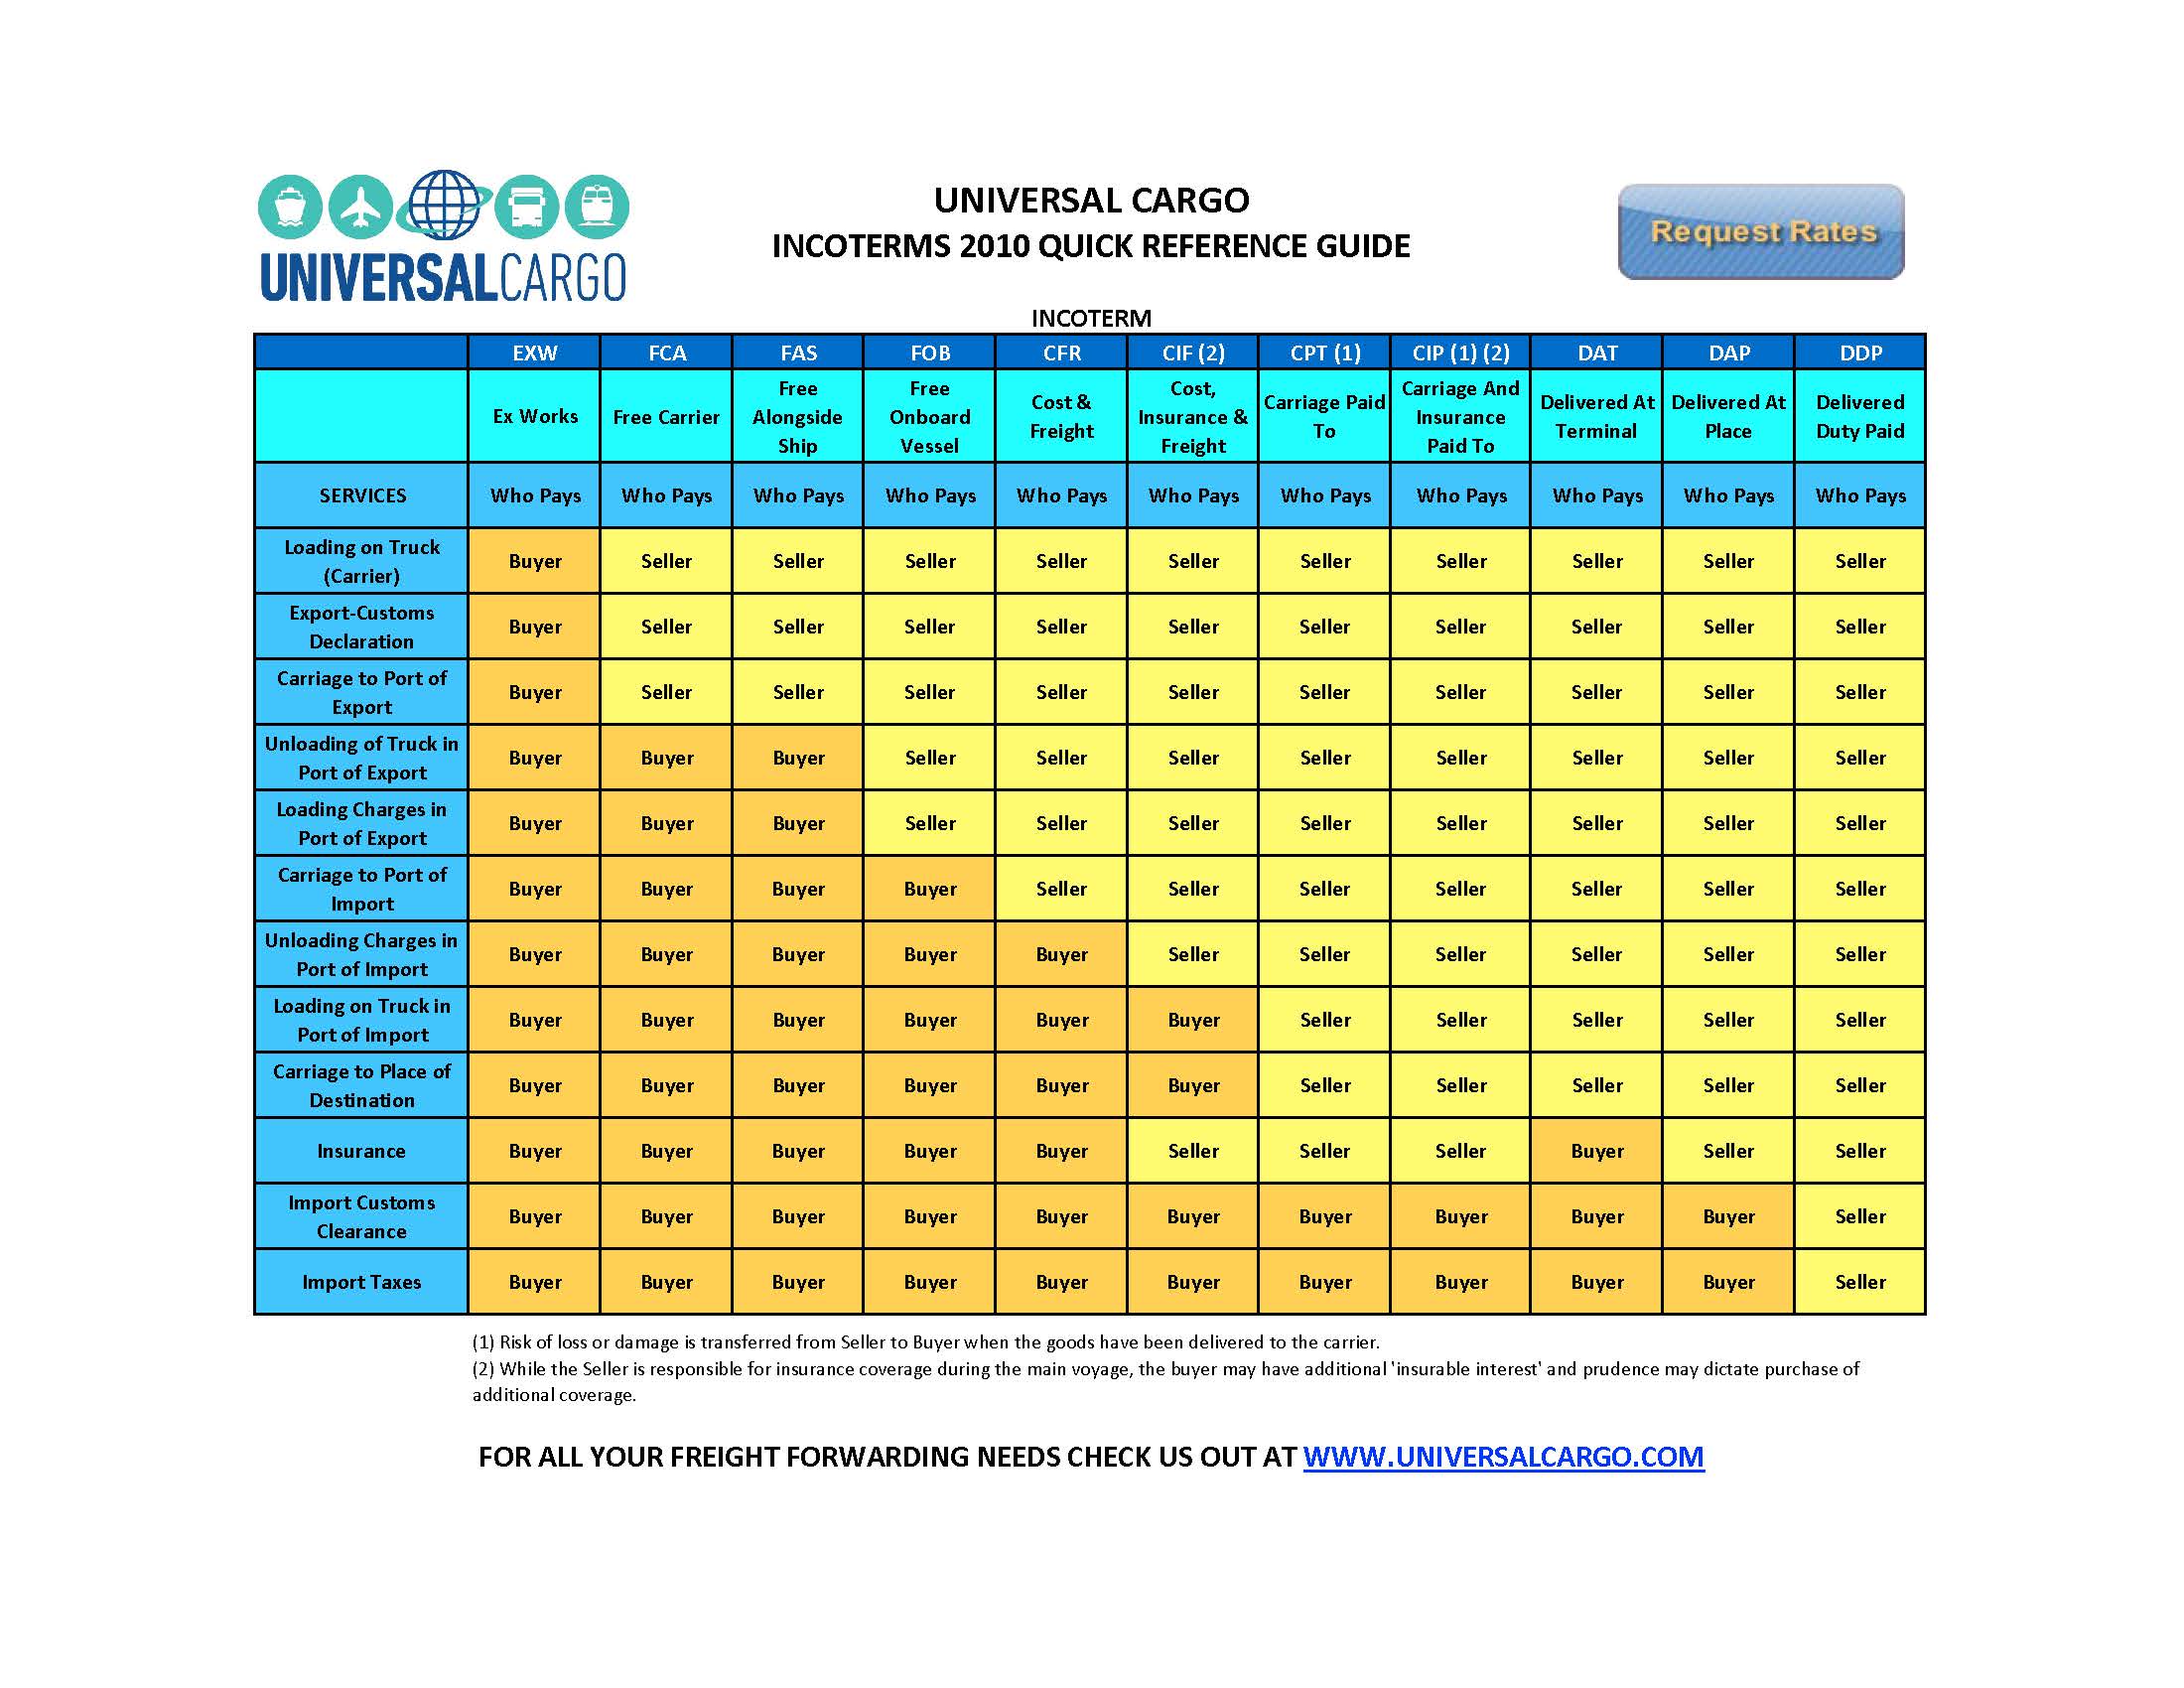 UCM Incoterms 2010